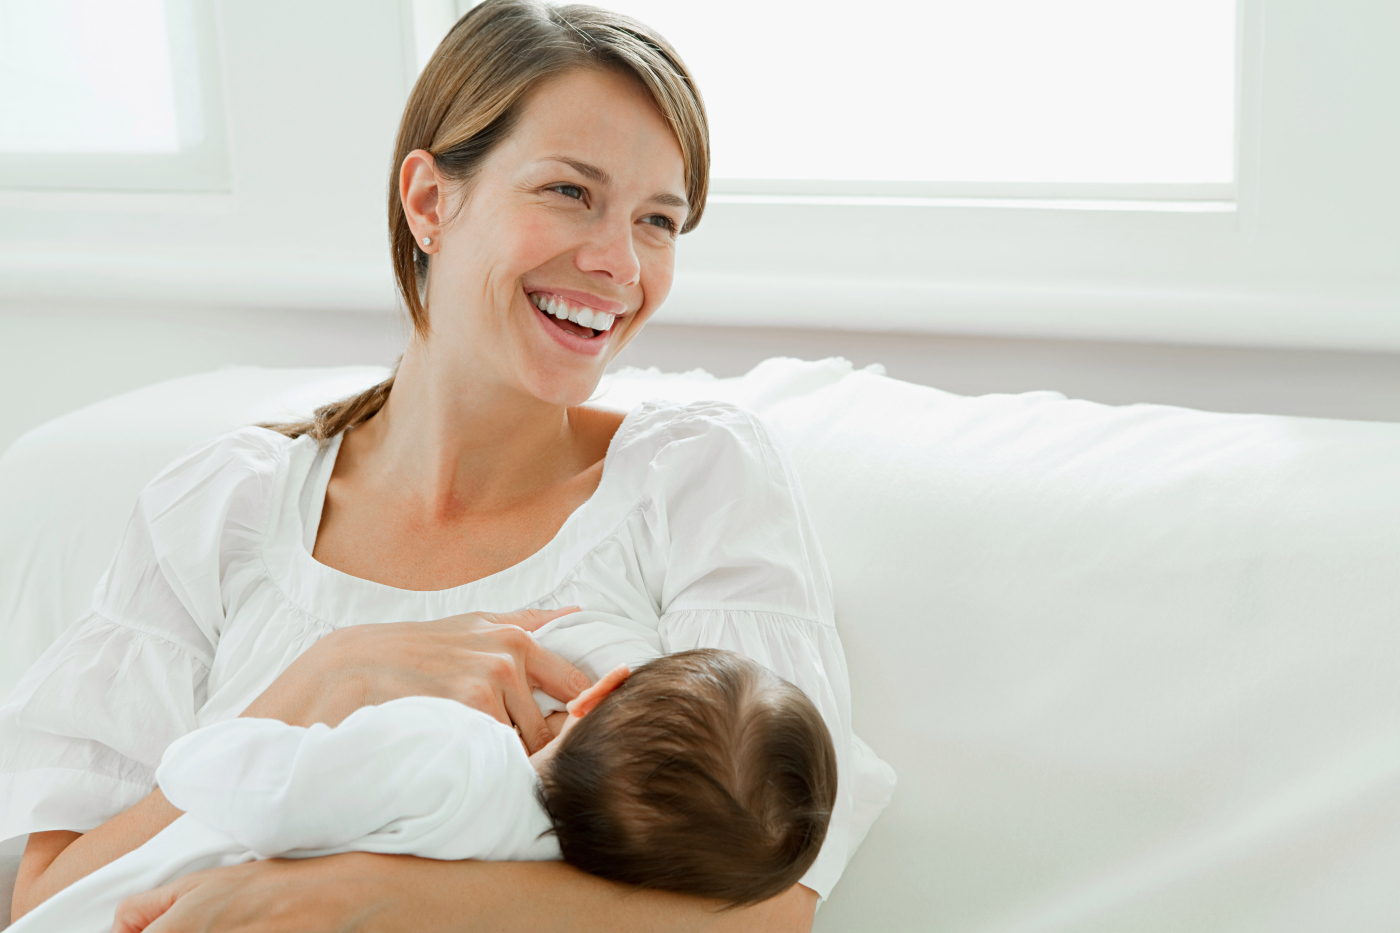 Breast-Feeding Benefits May Be Overstated, Sibling Study Says